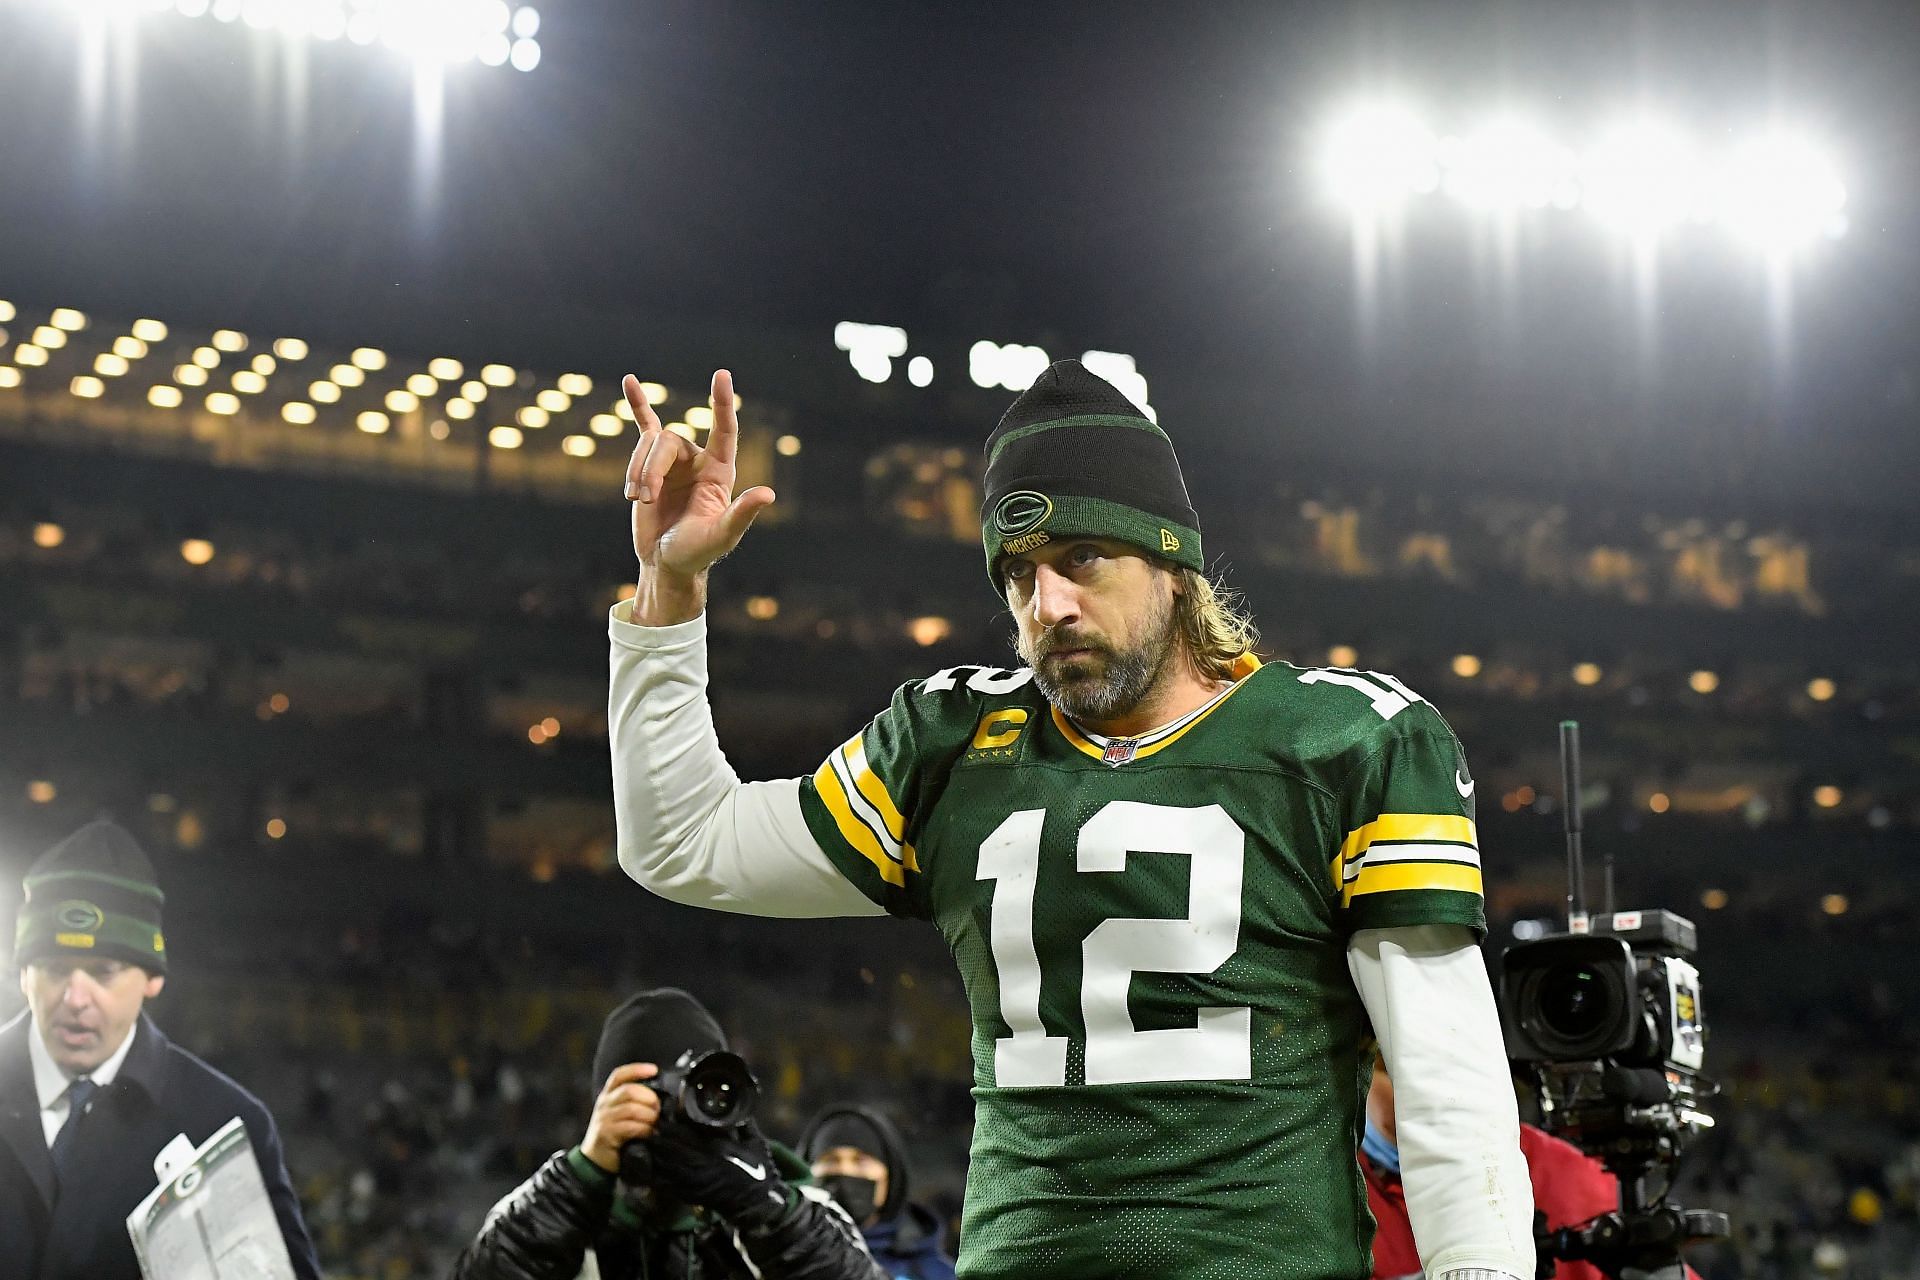 Aaron Rodgers could finally break through with the Packers in 2022